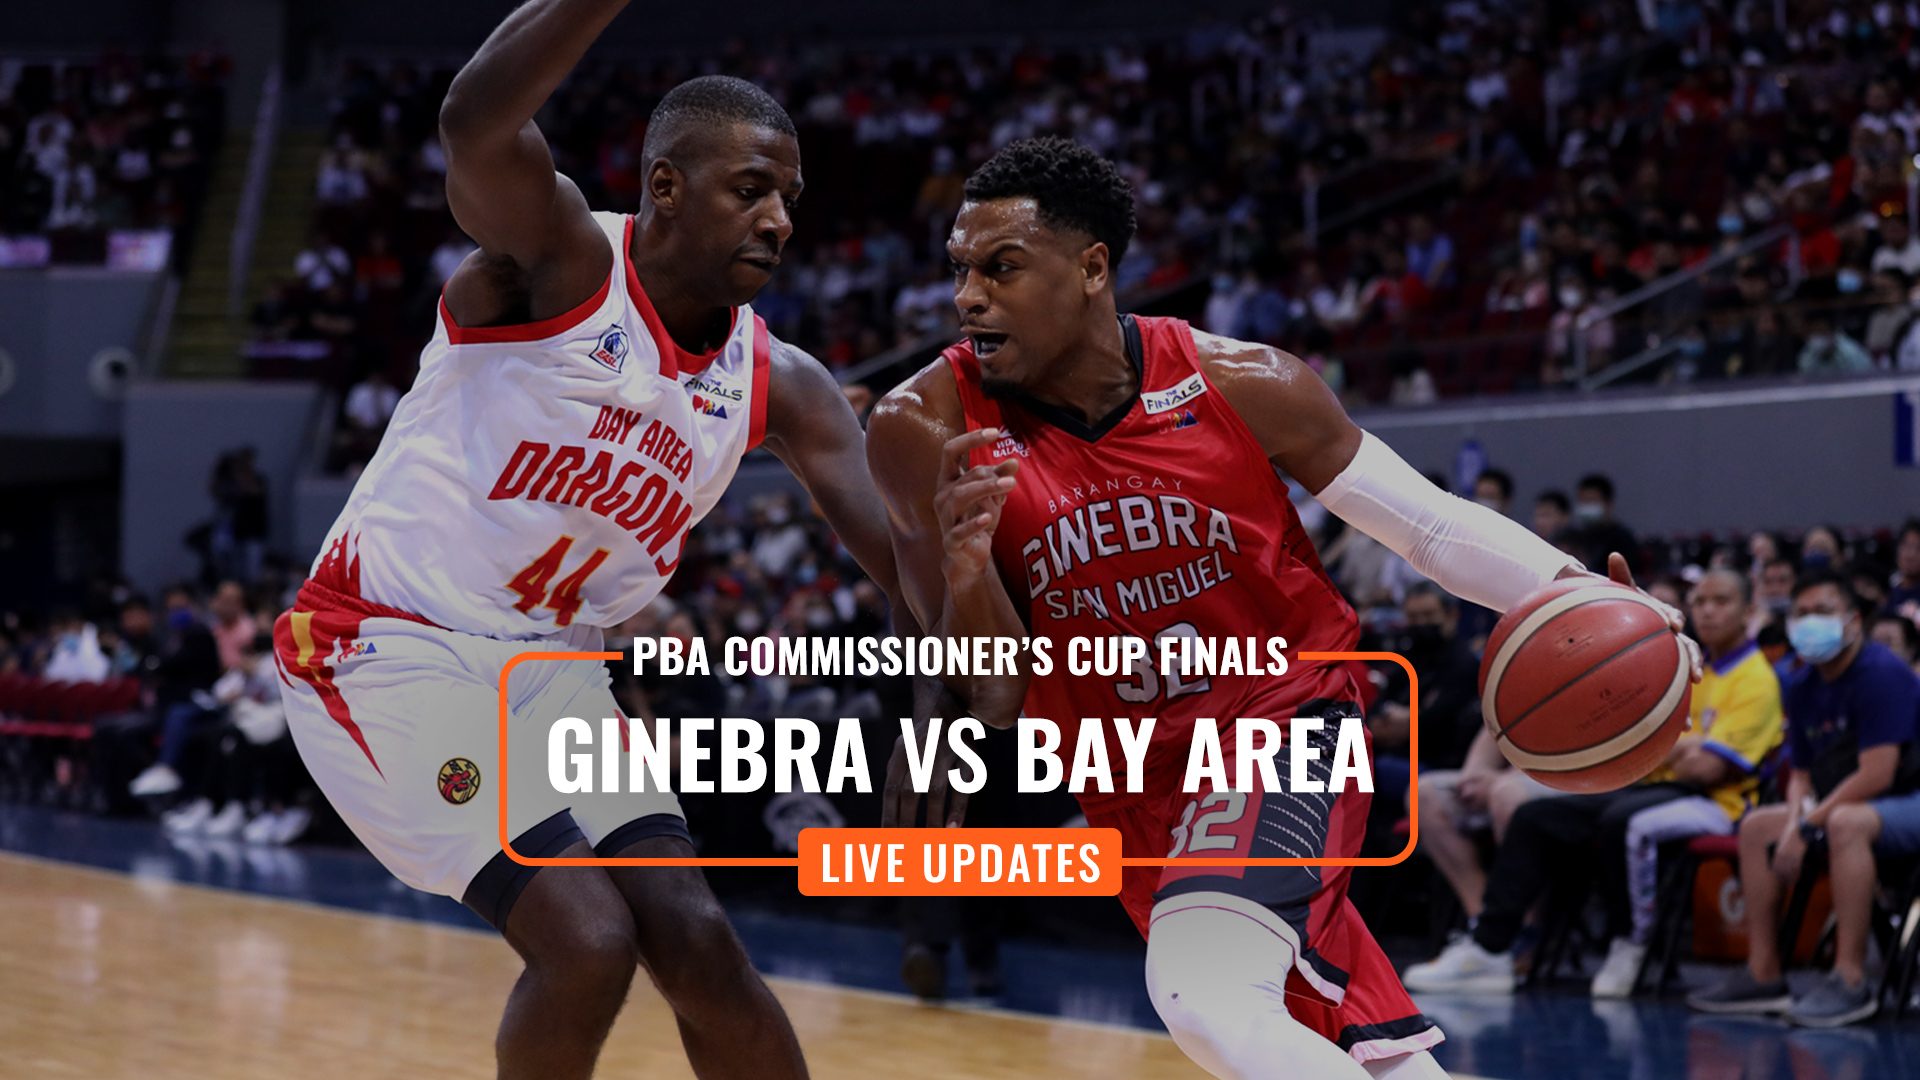 HIGHLIGHTS: Ginebra vs Bay Area, Game 2 – PBA Commissioner’s Cup finals 2022